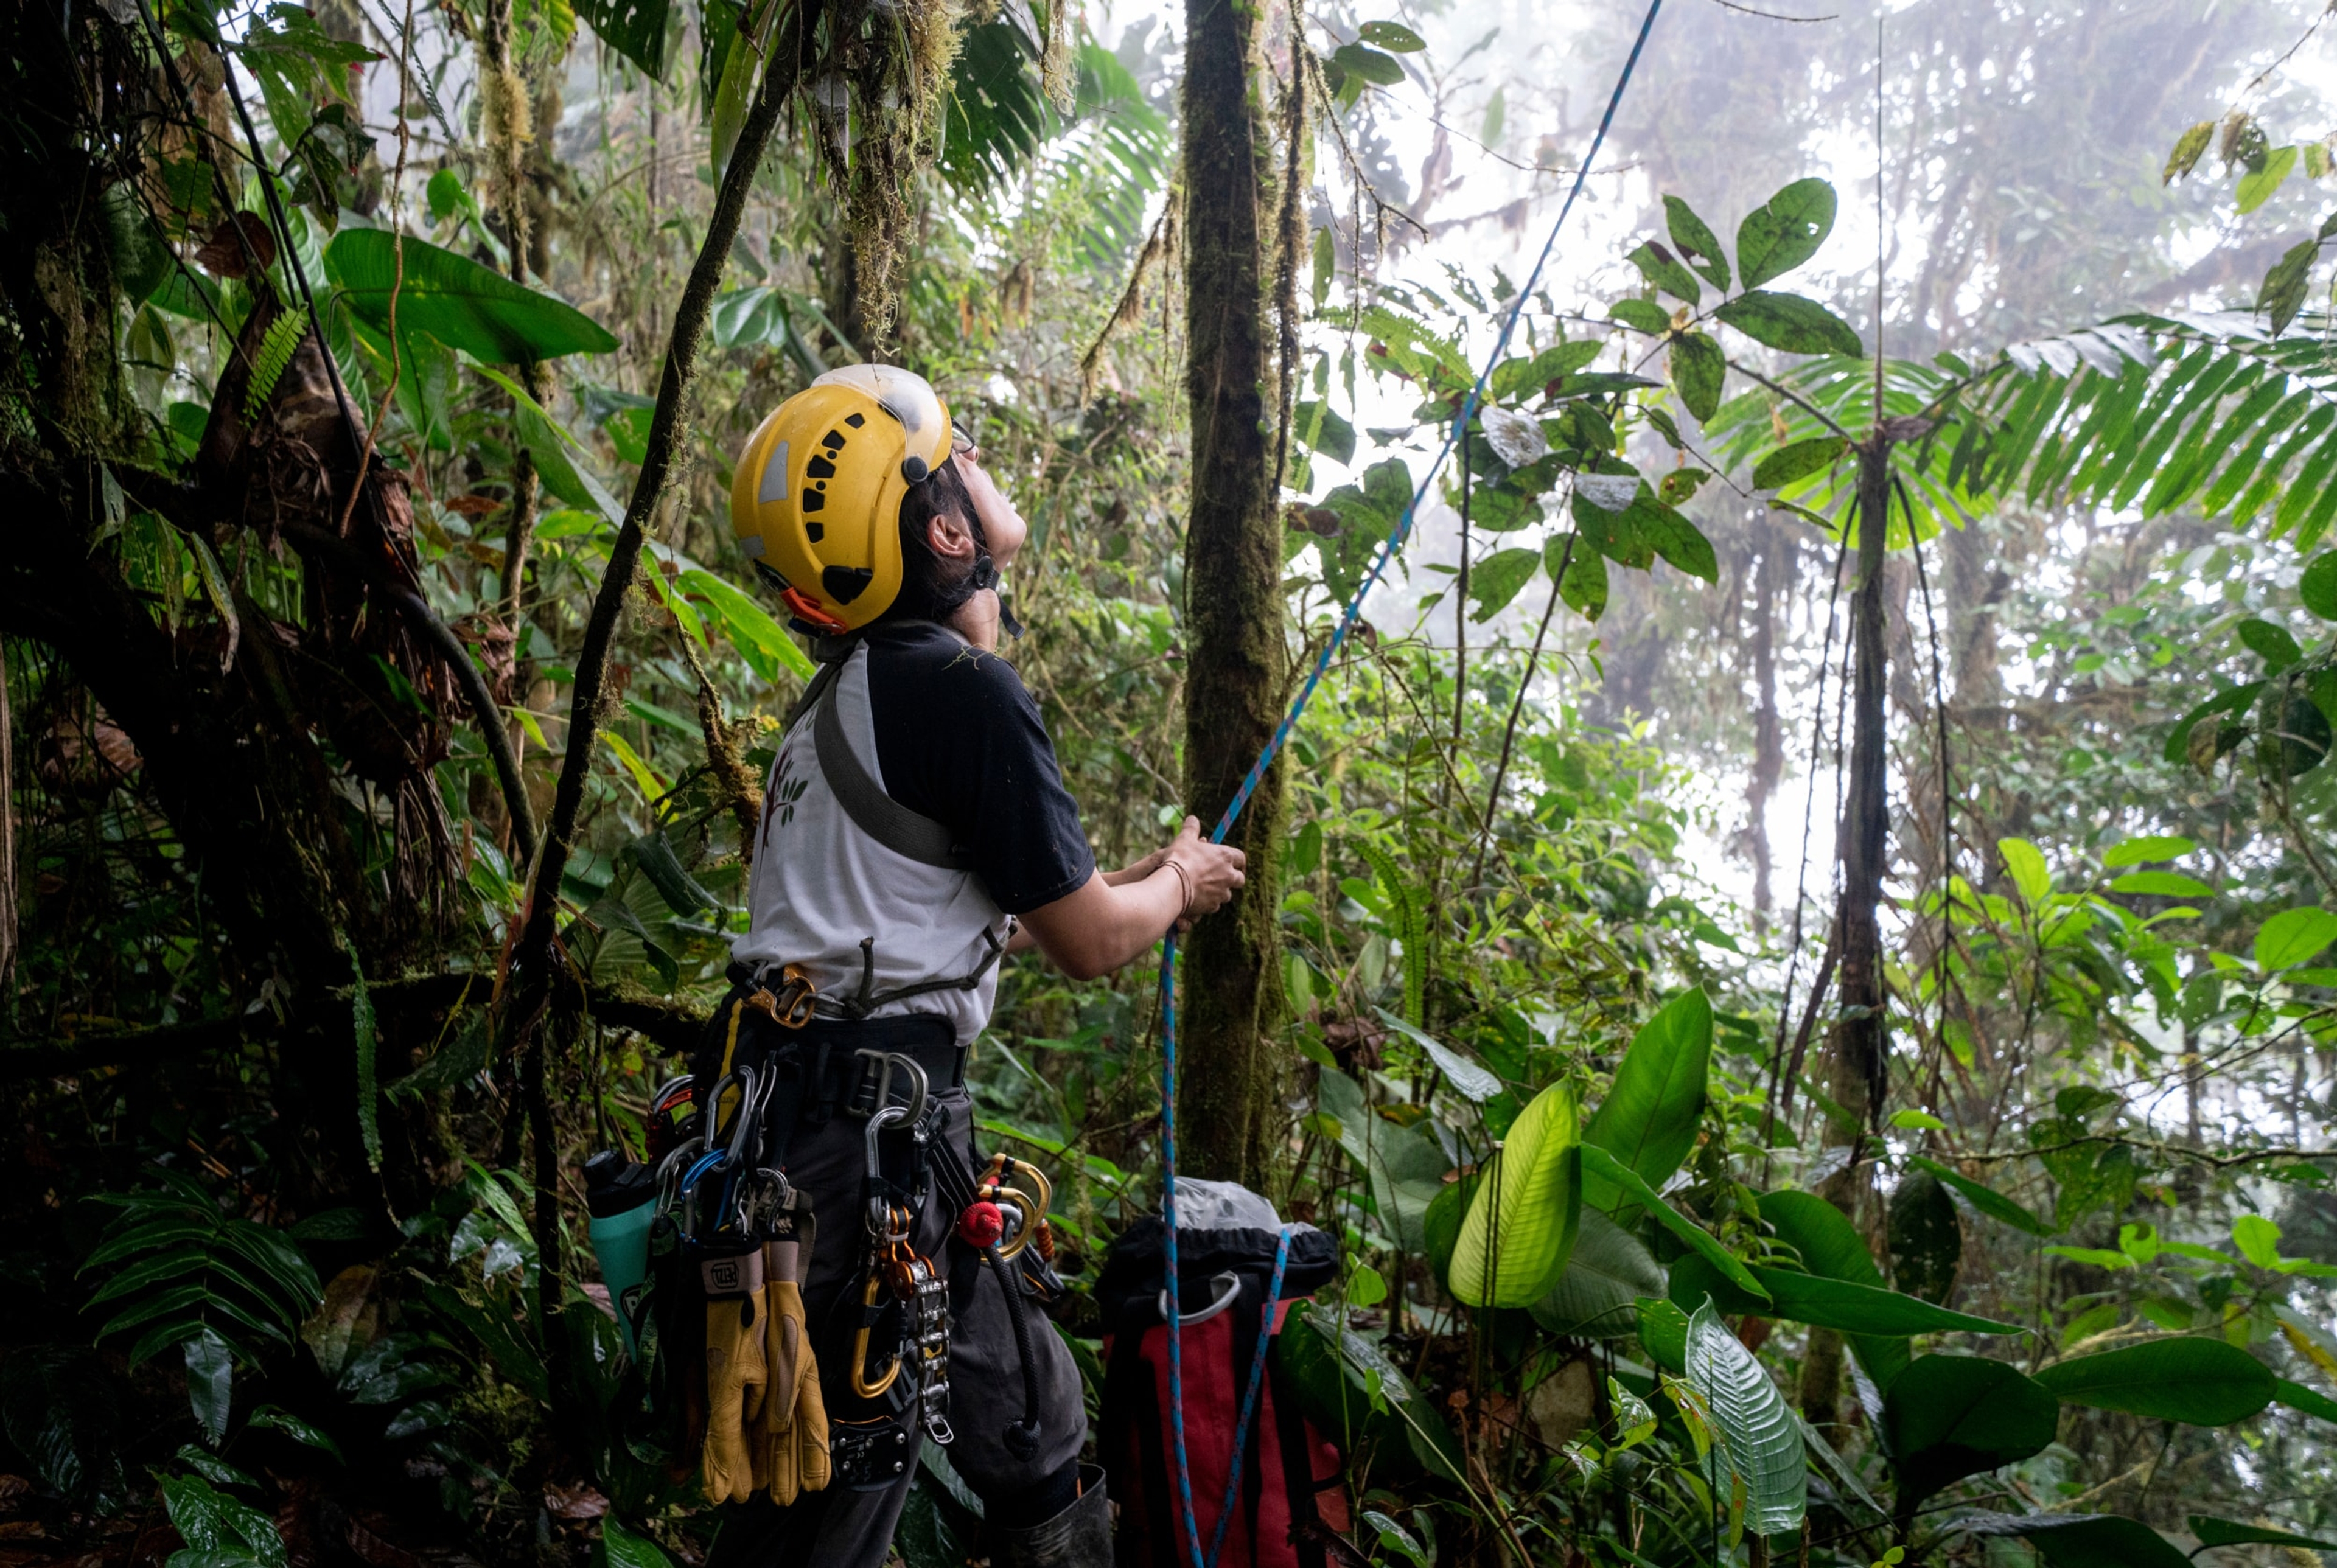 A member of a rainforest conservation crew examining a tree in the rainforest